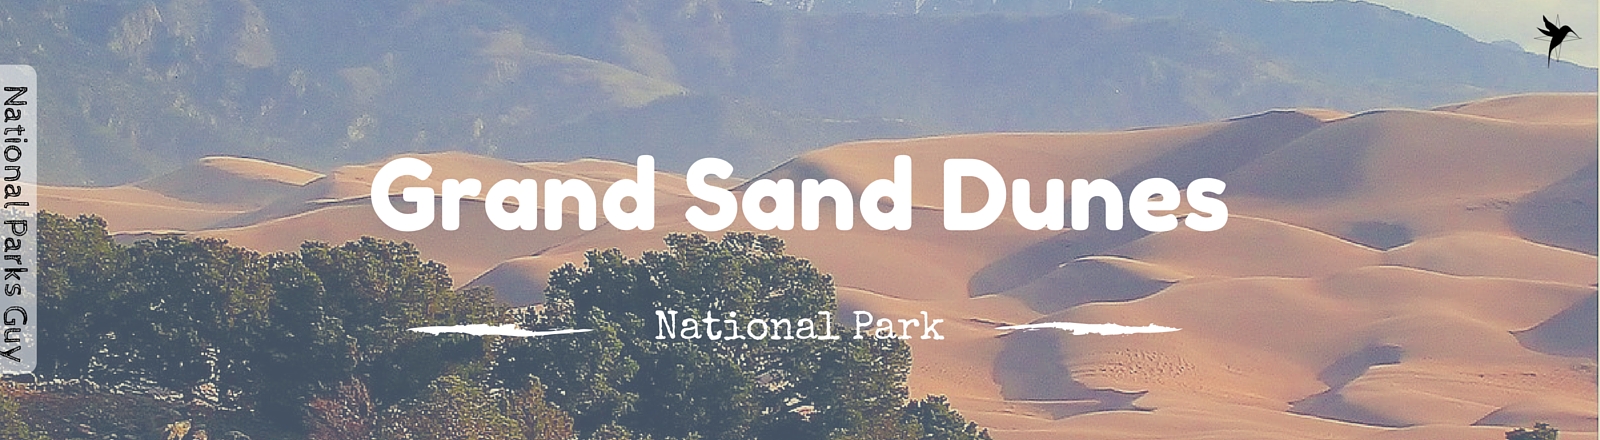 Great Sand Dunes National Park, USA, National Parks Guy, Stories, Tales, Adventures, Wildlife